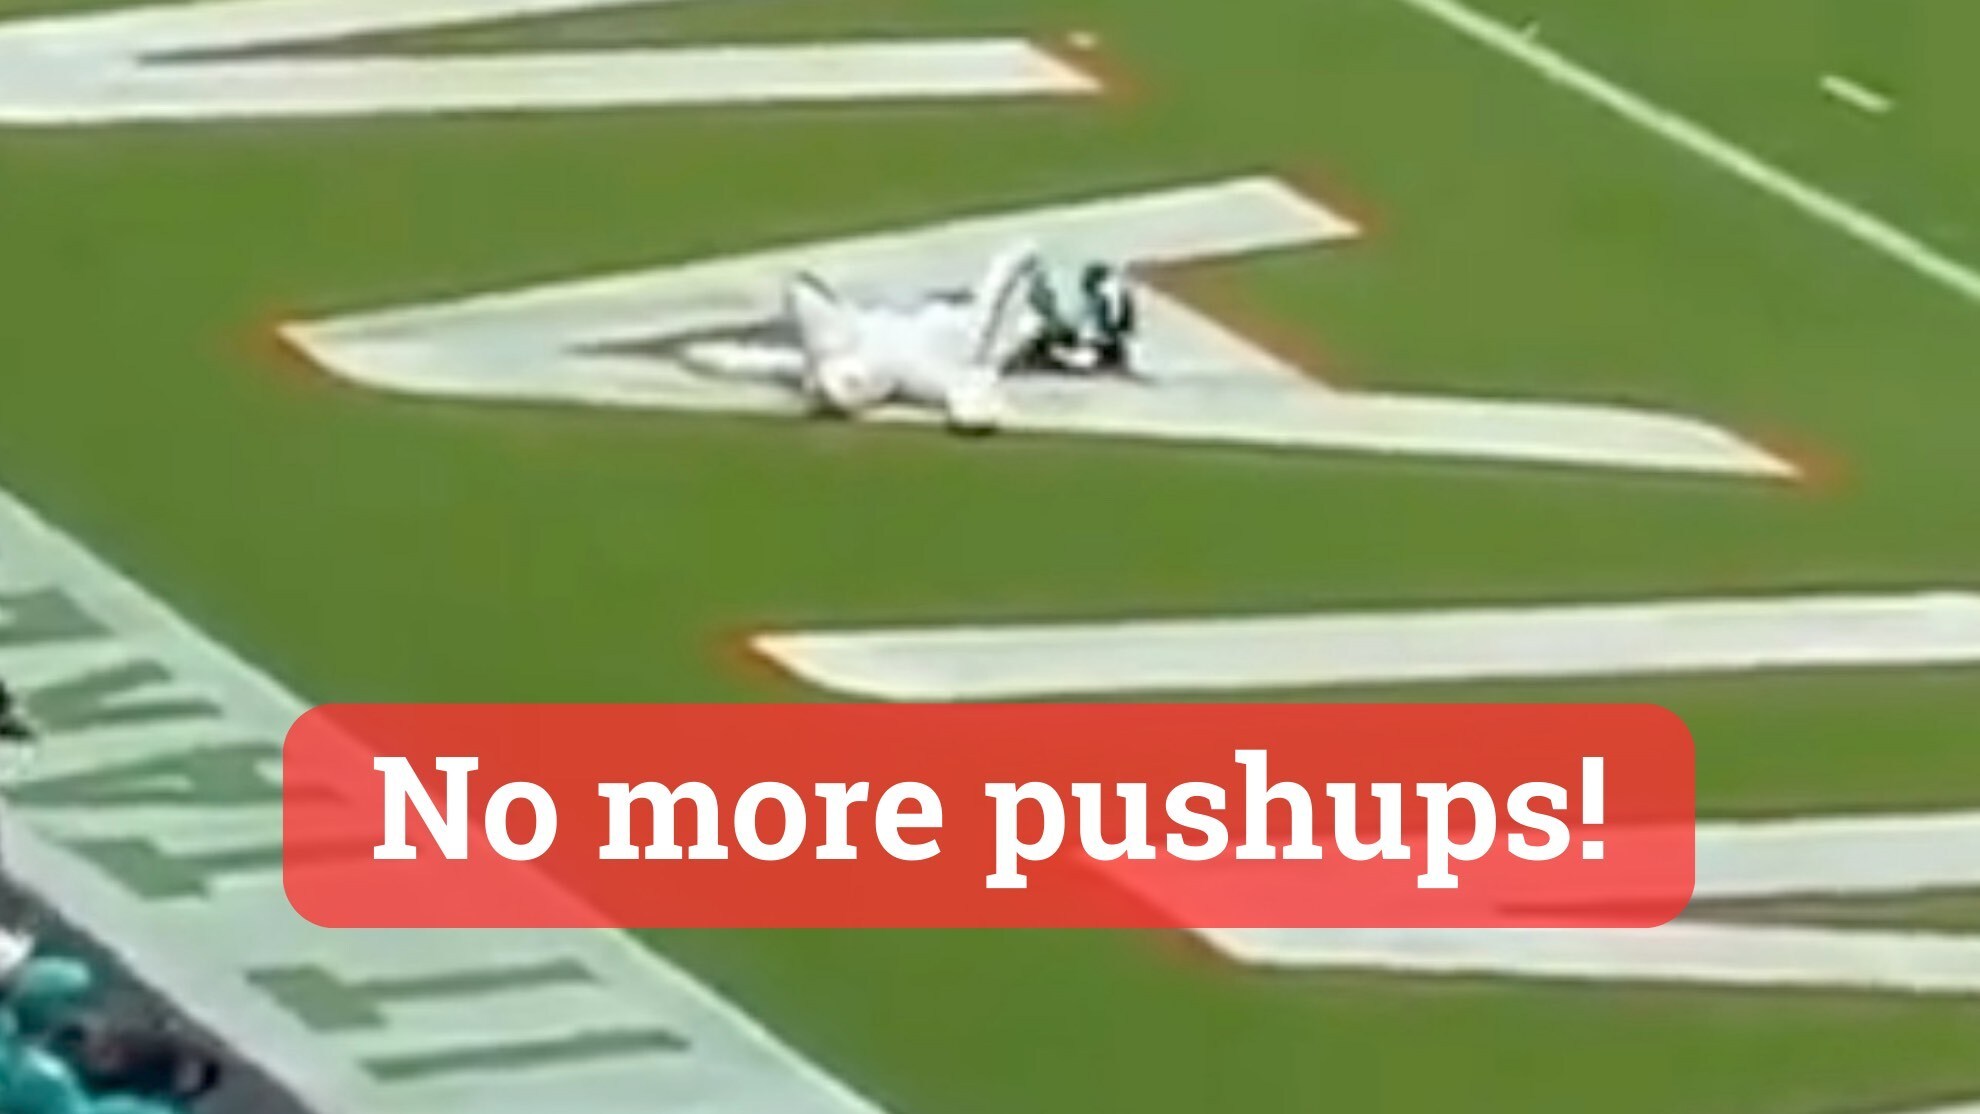 Miami Dolphins score 70 points and the poor mascot can't keep up